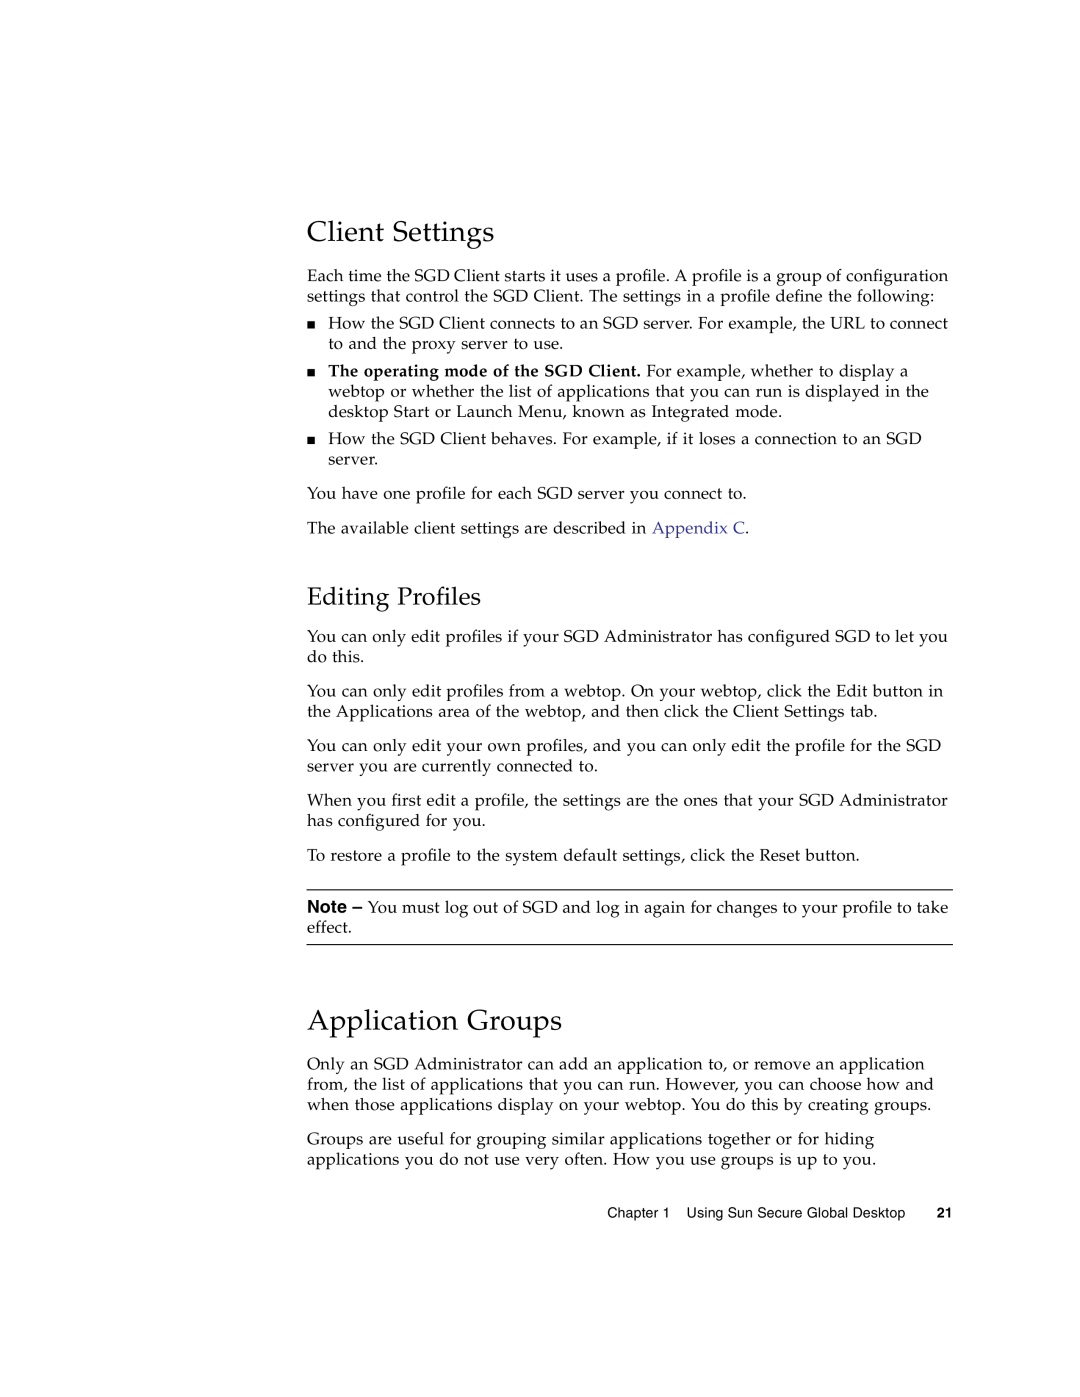 Sun Microsystems 4.5 manual Client Settings, Application Groups, Editing Profiles 